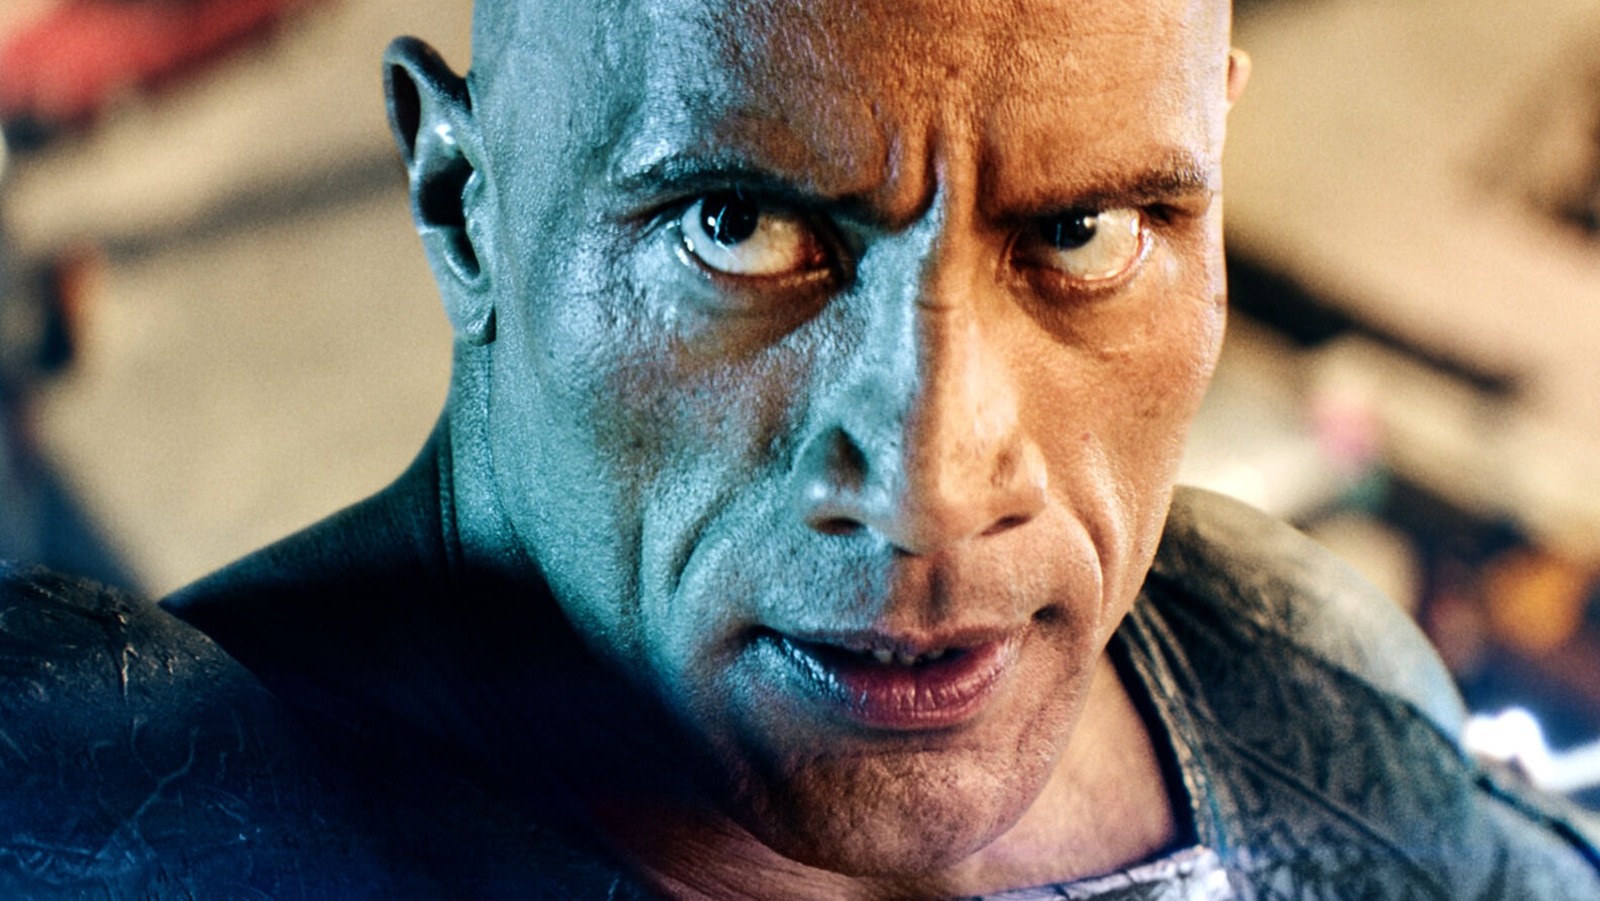 Why did Black Adam fail at the box office? - Quora